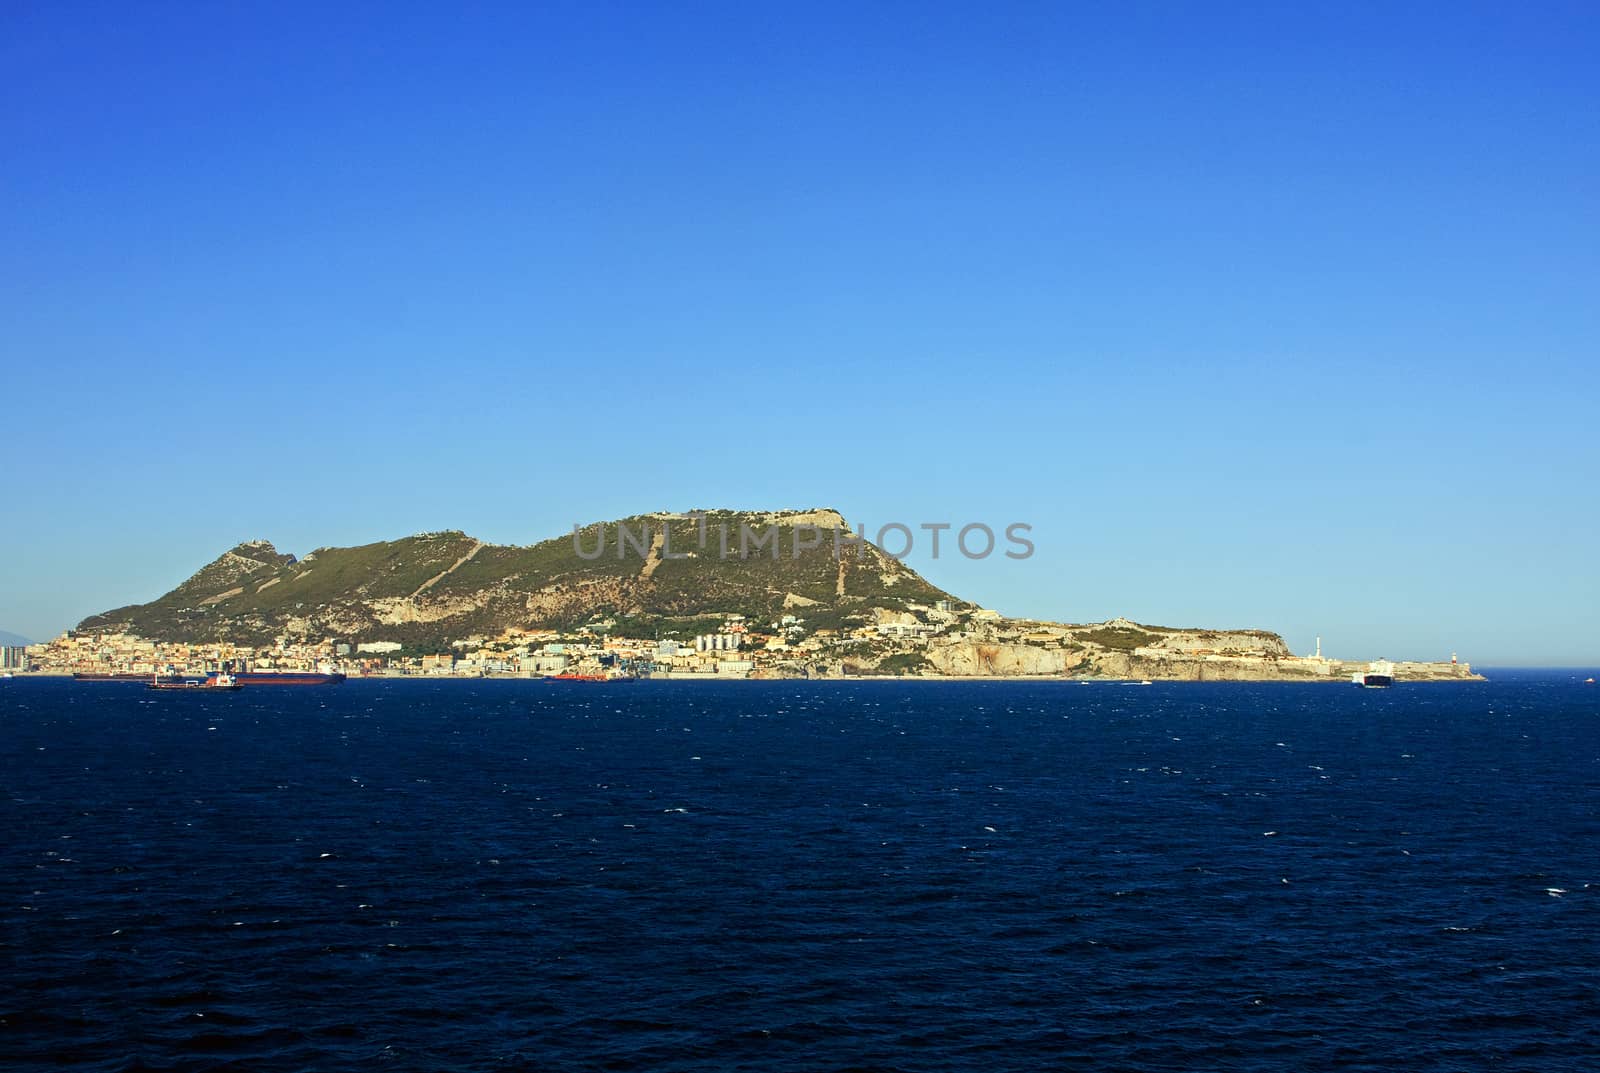 Gibraltar is a British territory located to the south of the Iberian Peninsula at the entrance to the Mediterranean Sea.  The land is one of the most southerly points in Europe.